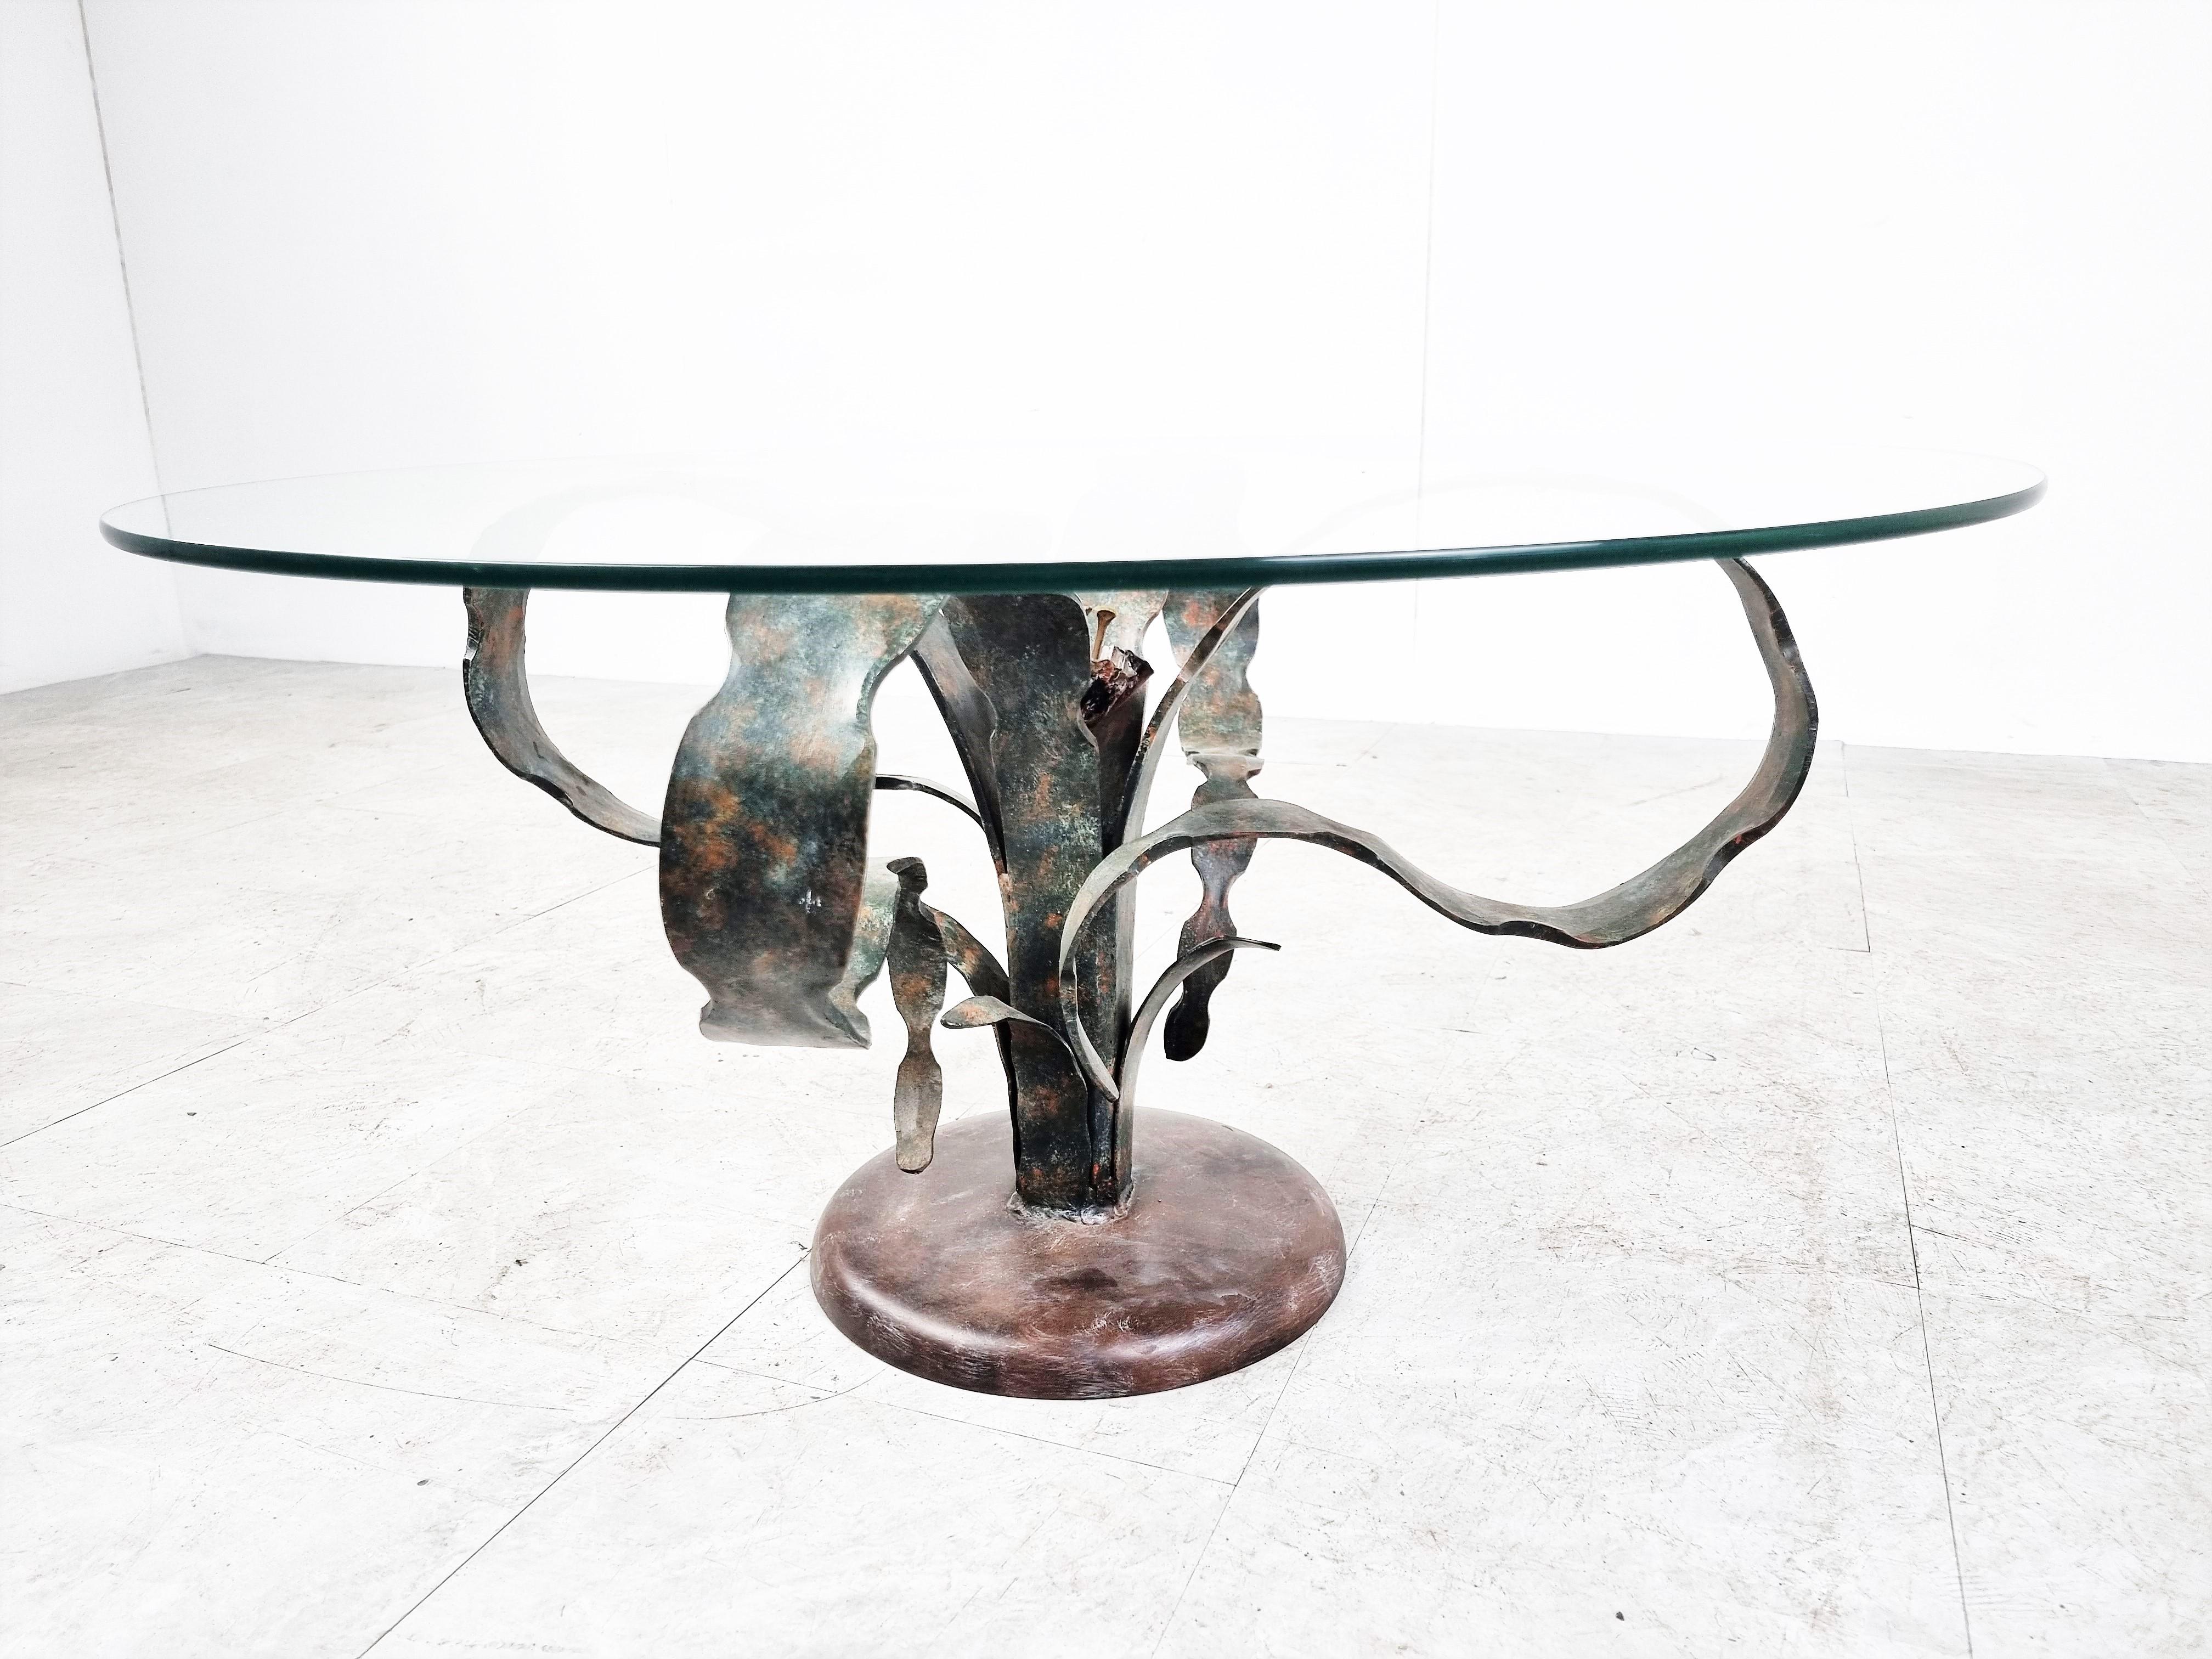 Beautiful sculpted flower cut steel brutalist coffee table with a clear round glass table top.

Striking Brutalist design

Good condition

1970s - Germany

Dimensions:
Height: 44cm/17.32